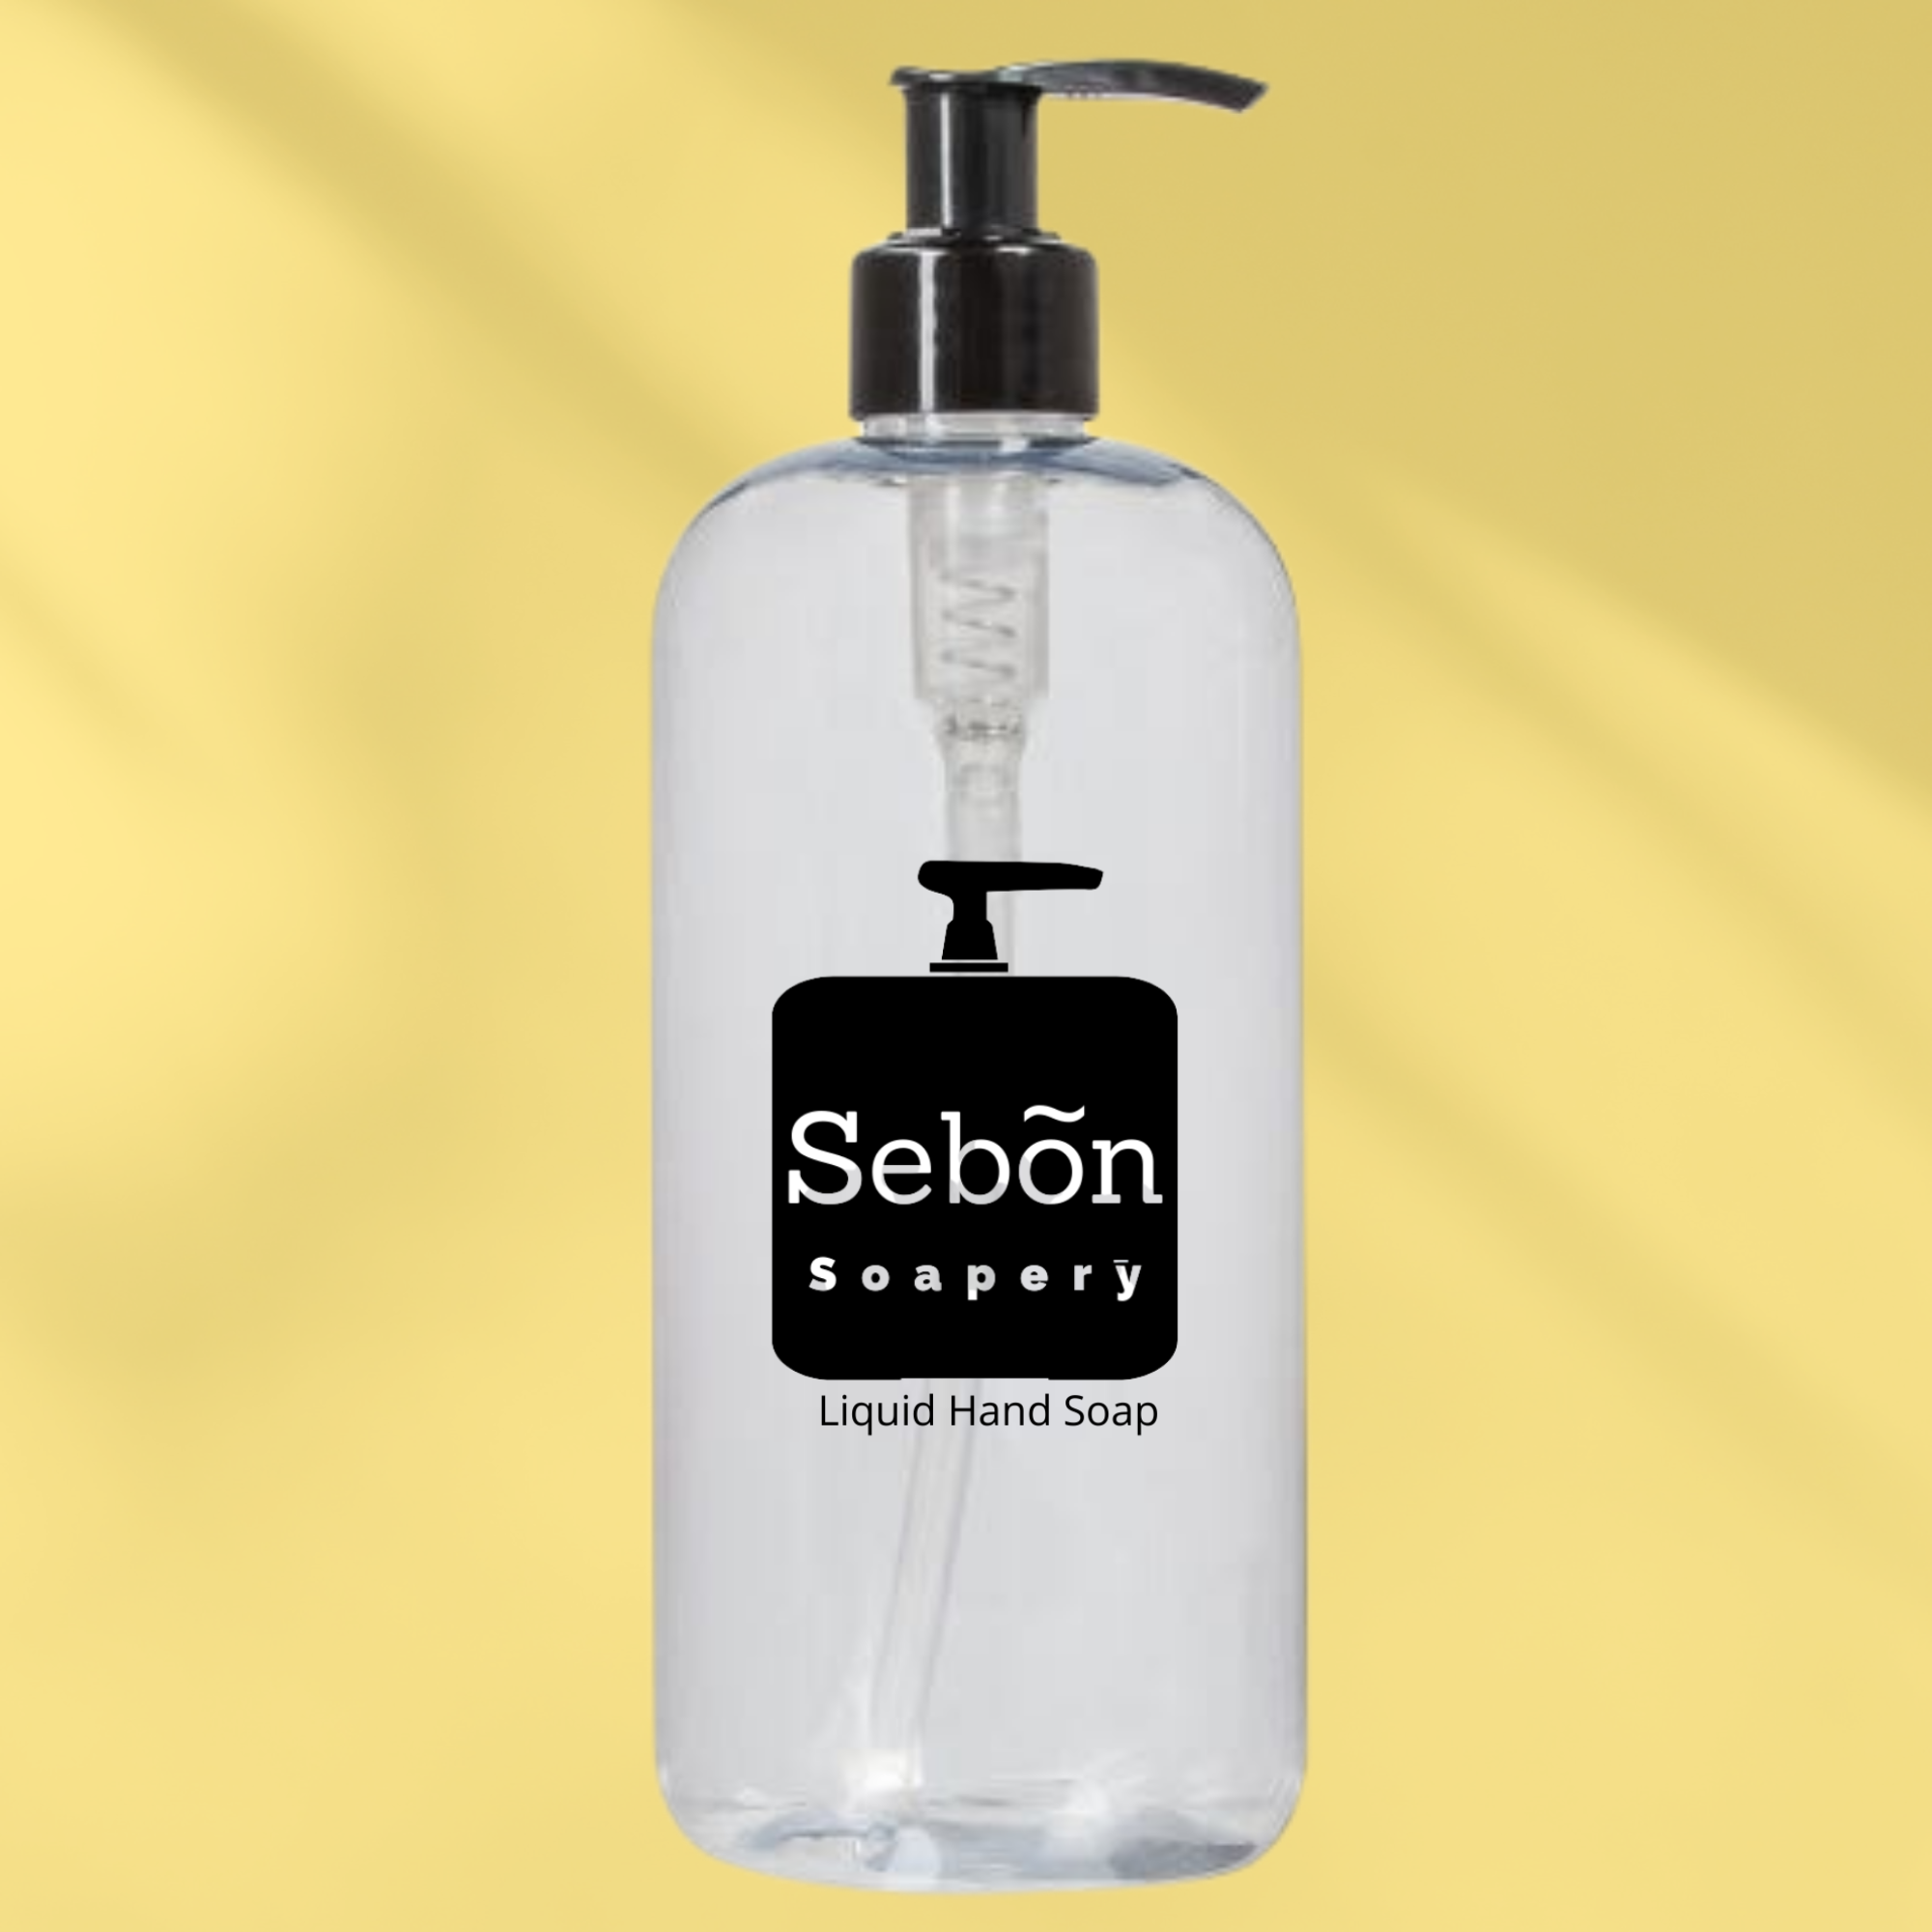 Sebon Bartlett Pear & Brandy Scented Liquid Hand Soap with Olive Oil